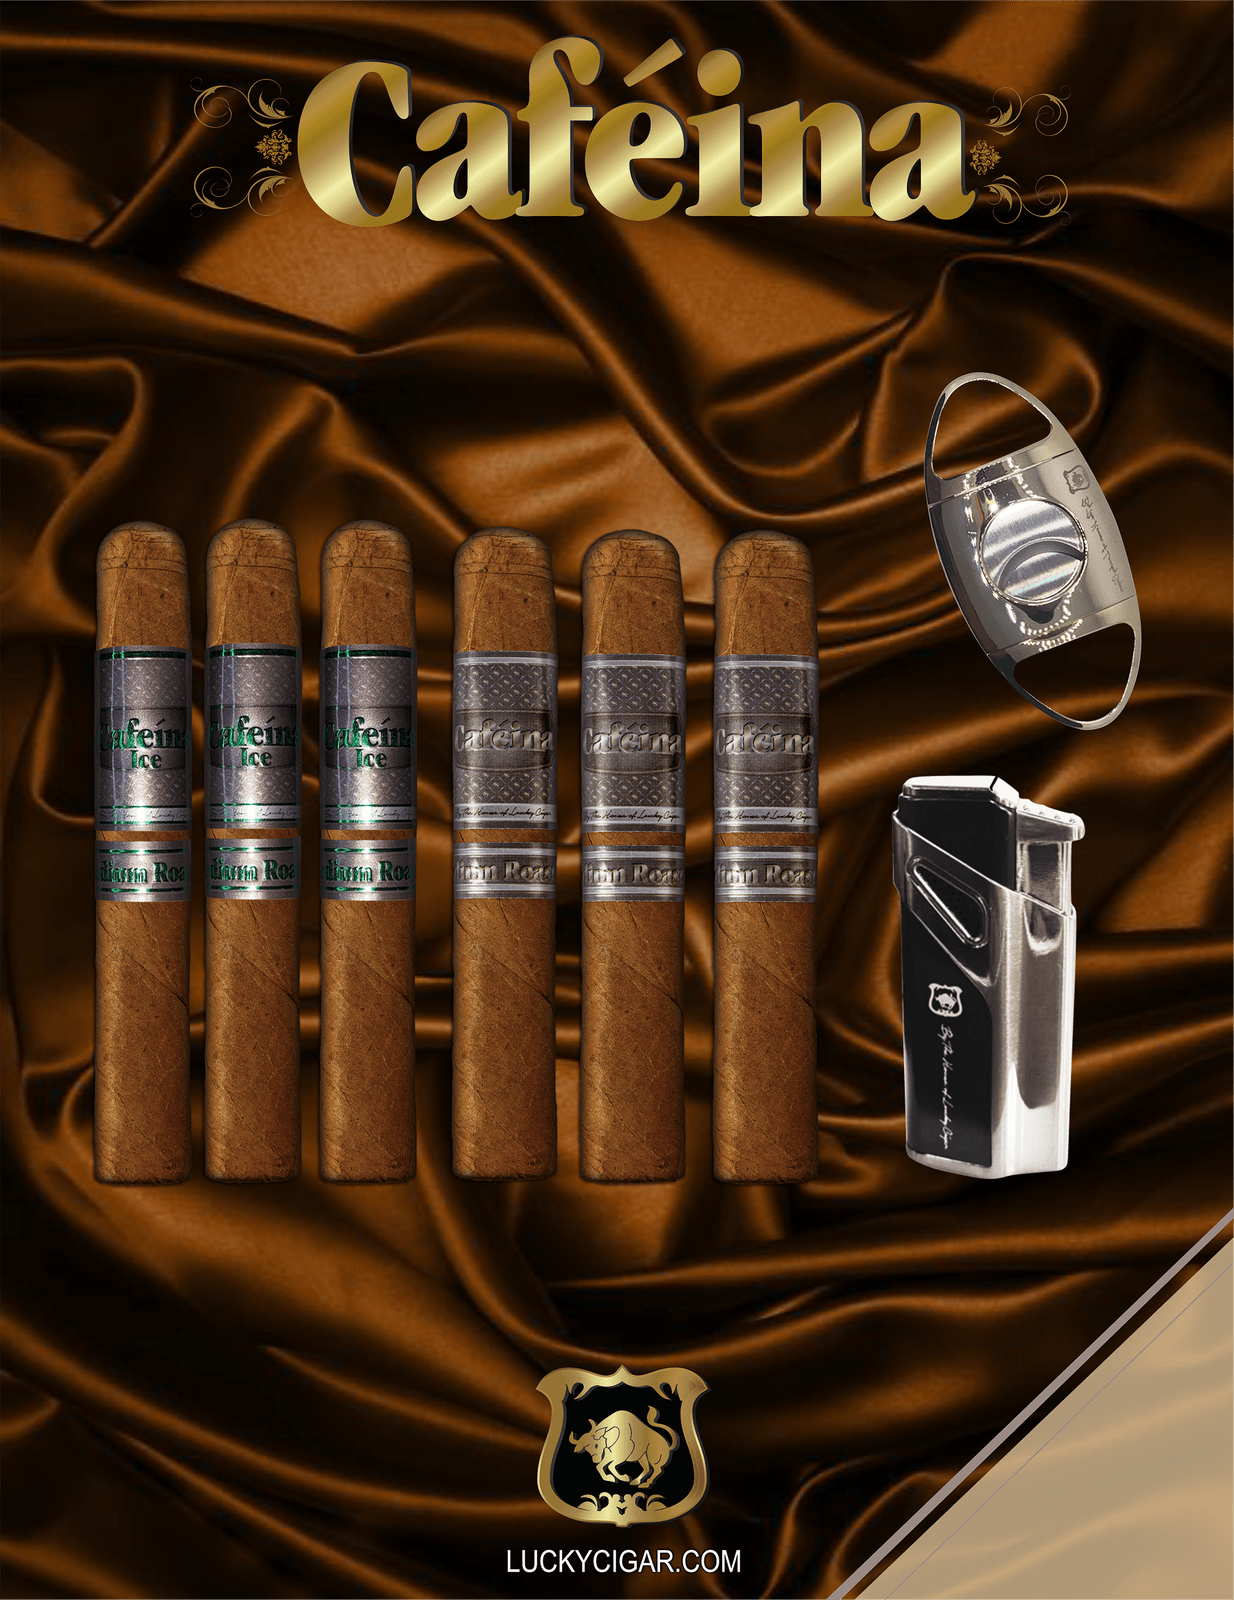 Infused Cigars: Set of 6 Cafeina Roast Cigars - 3 Medium 6x52, 3 Ice 6x52 with Lighter, Cutter